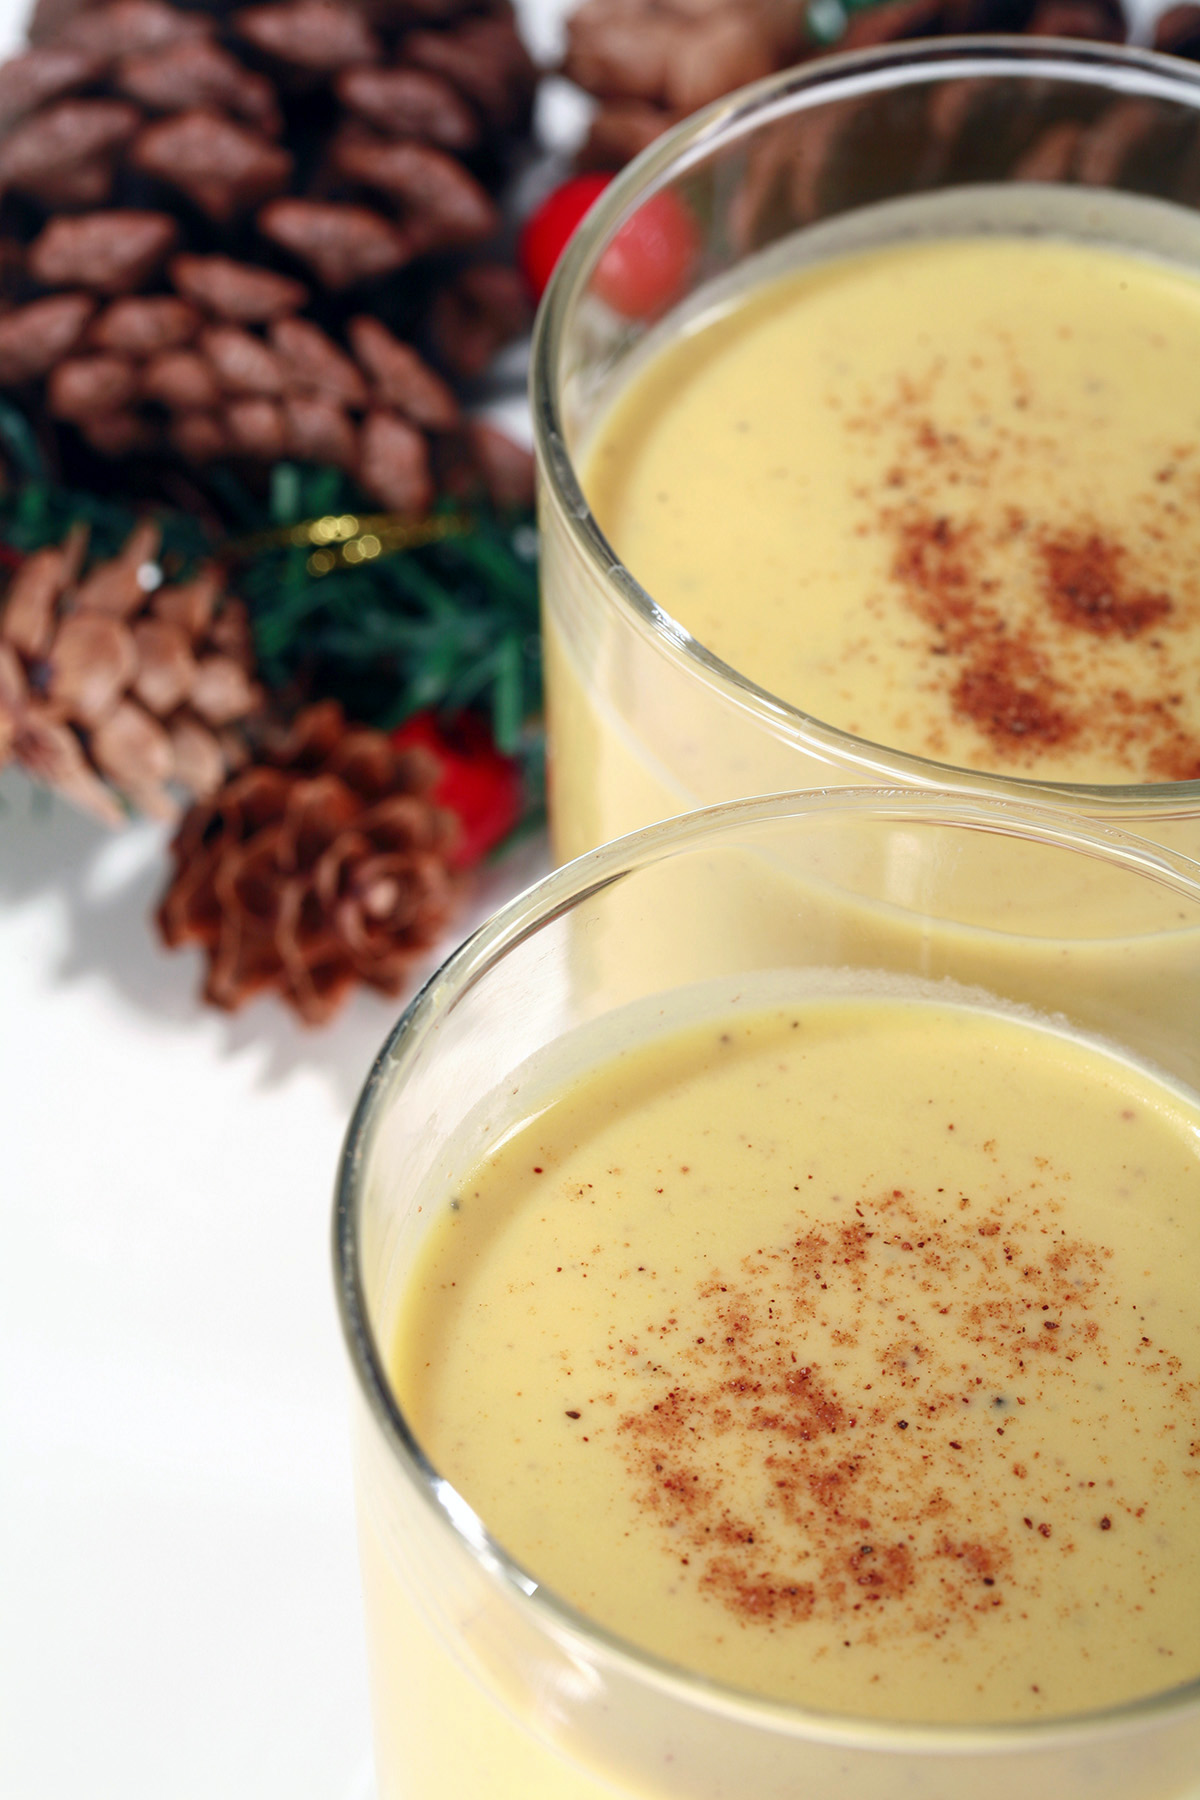 2 small glasses of low carb eggnog, with pine cones, berries, and greenery behind them.